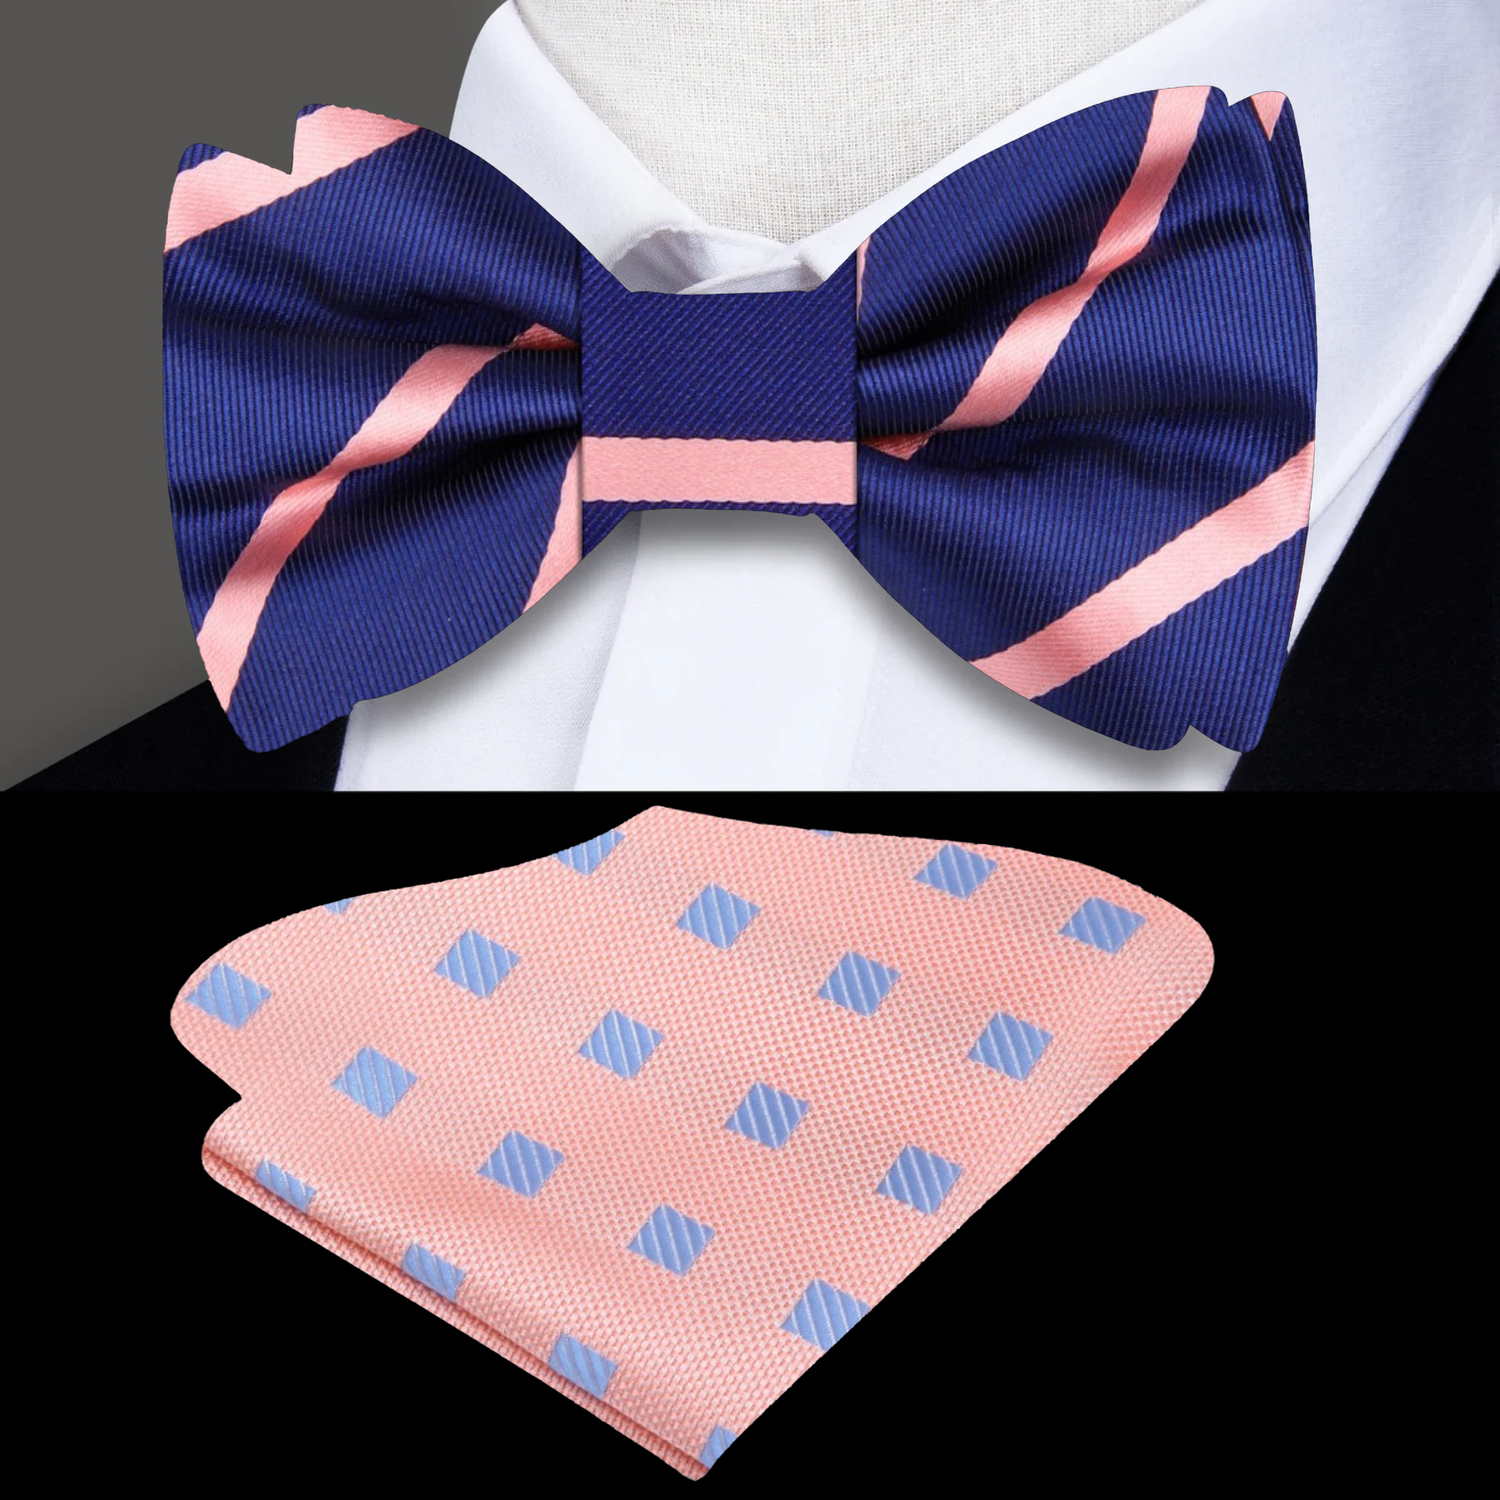 Dark Blue with Salmon Stripes Bow Tie with Accenting Salmon and Light Blue Geometric Pocket Square